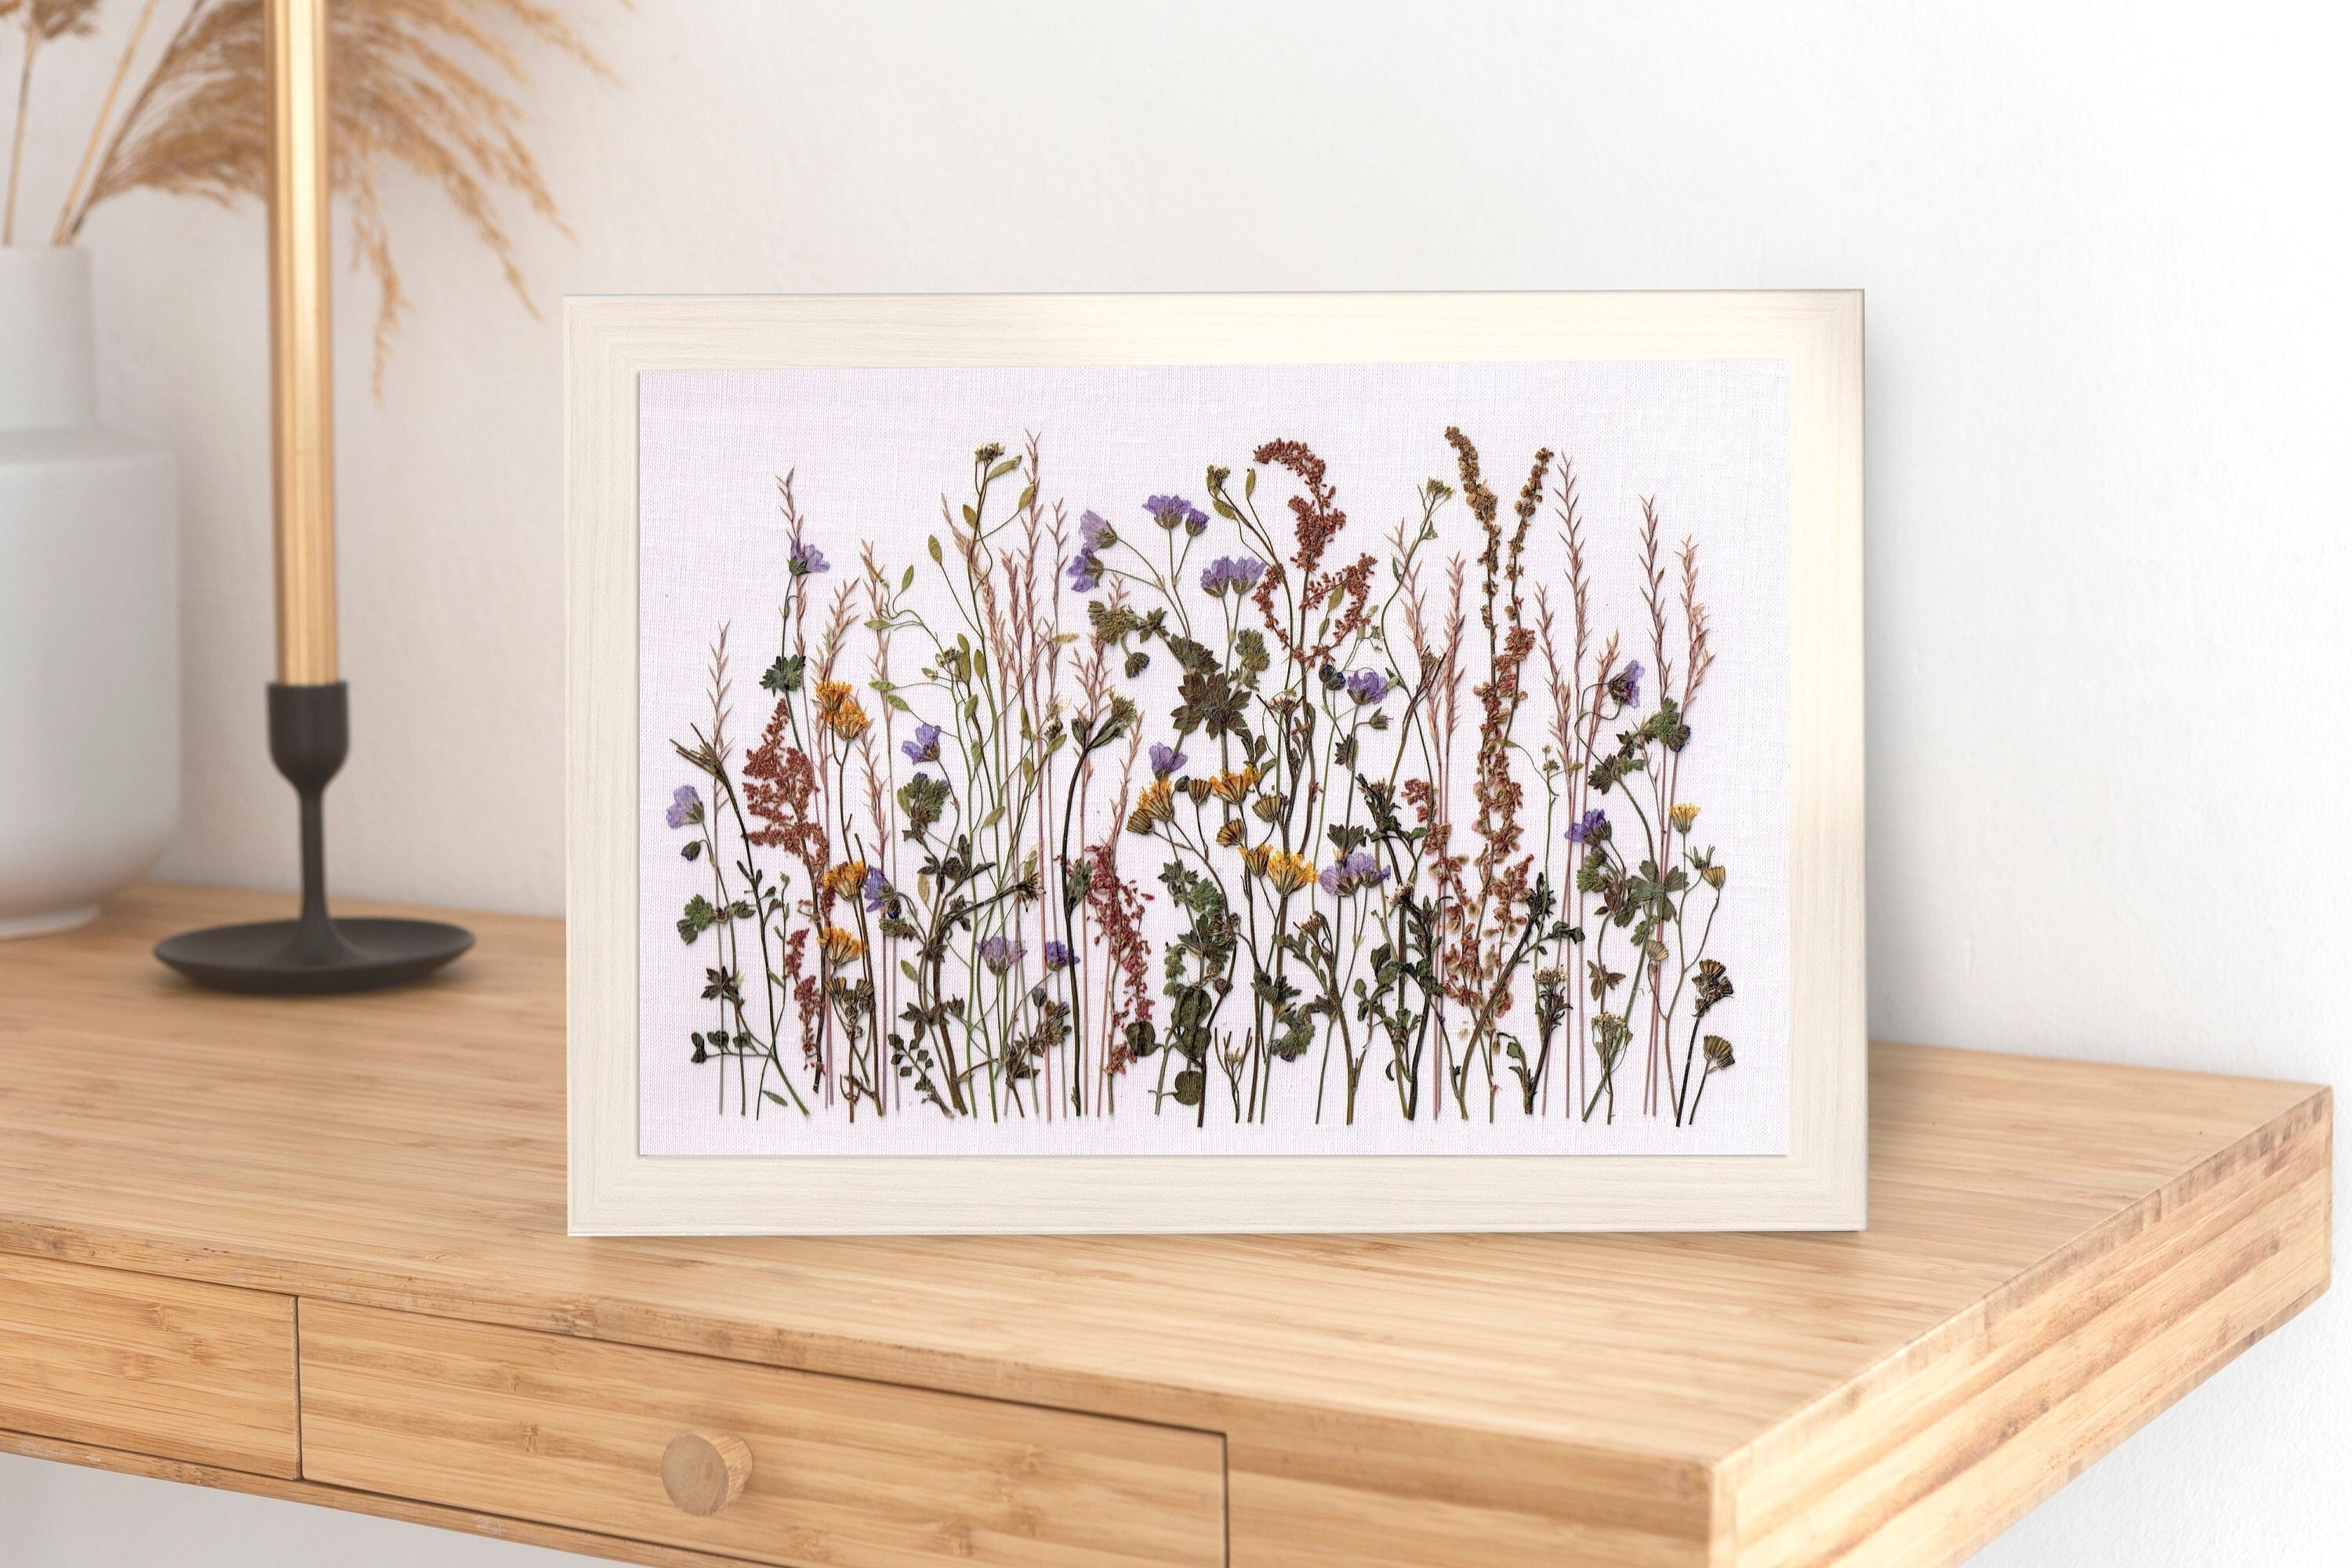 My new handmade oshibana -> Real pressed and dried flowers in frame.  Handpicked flowers, pressed and dried for weeks, arranged in one-a-kind  floral decor. Enjoy! : r/somethingimade